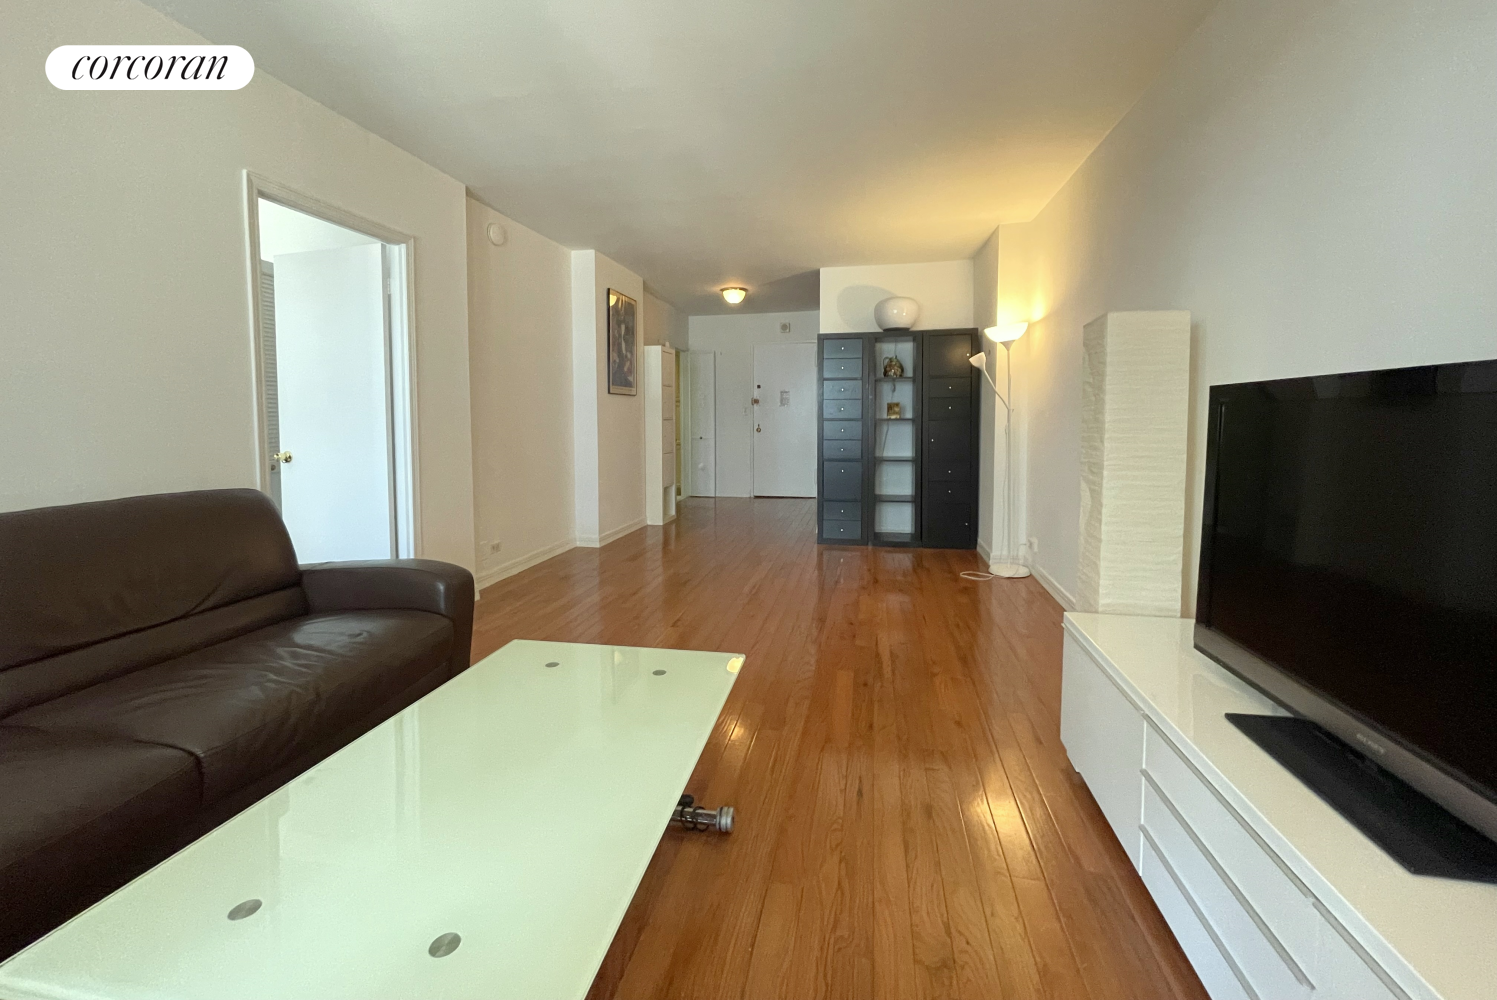 159 West 53rd Street 15G, Chelsea And Clinton, Downtown, NYC - 1 Bedrooms  
1 Bathrooms  
3 Rooms - 